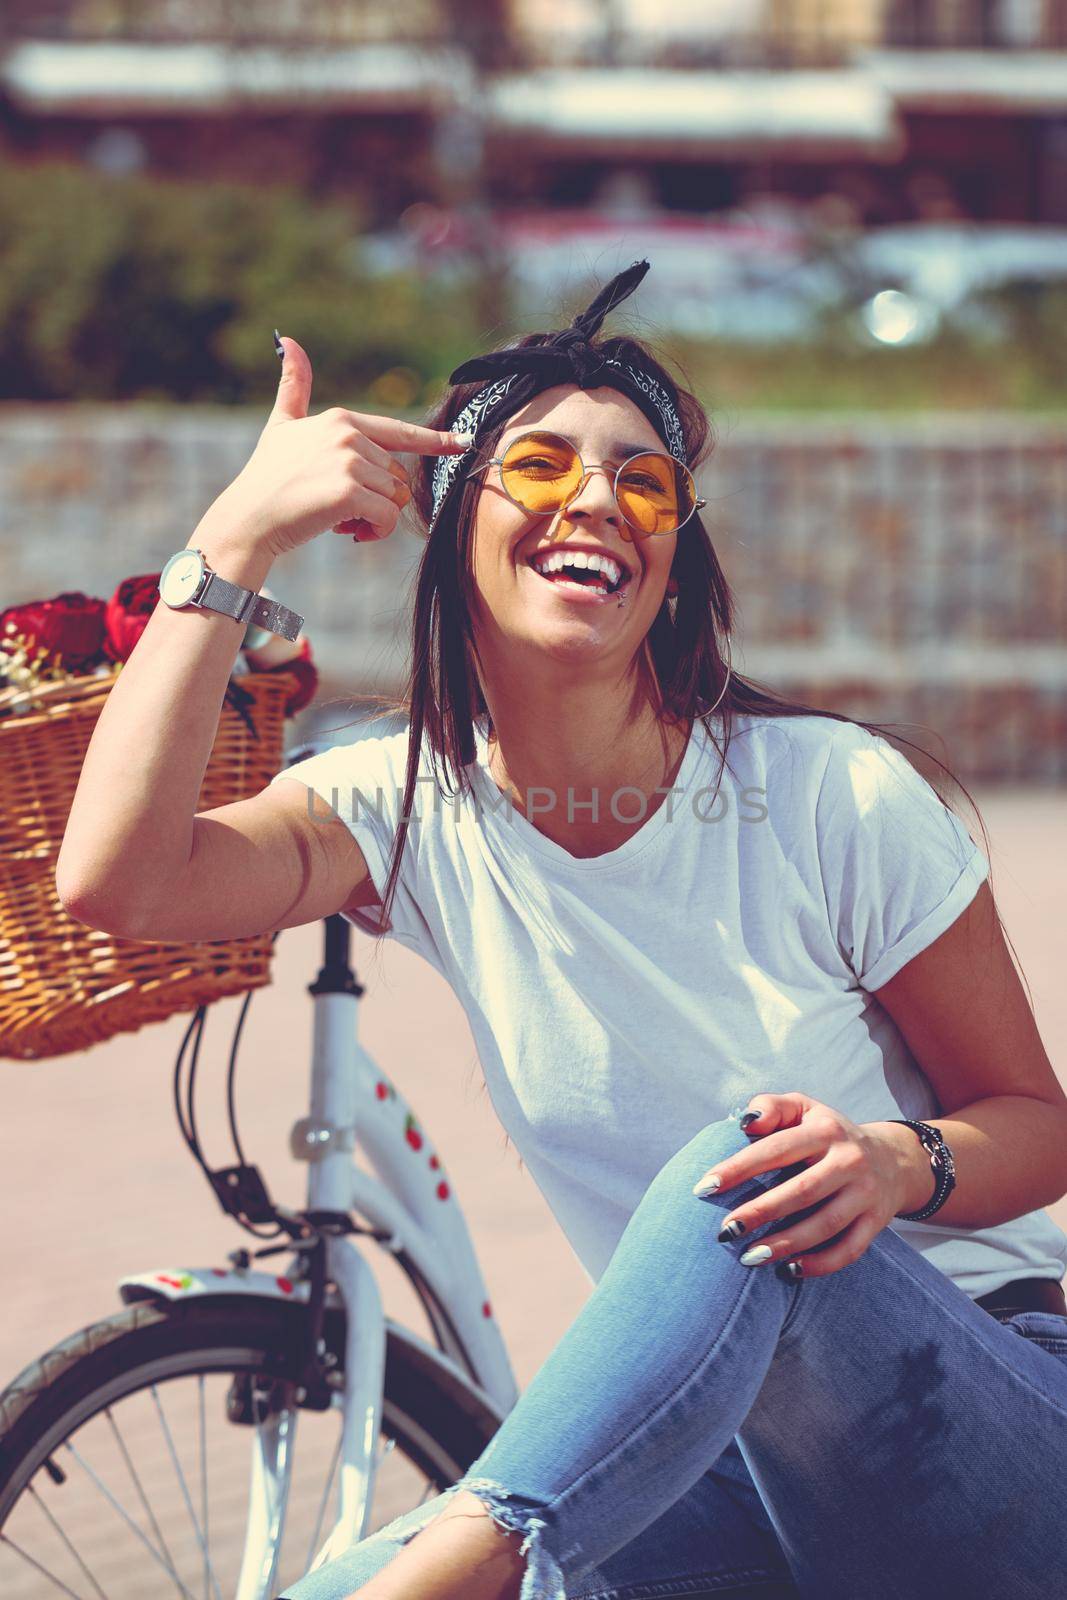 Pretty happy young woman is enjoying and having fun putting a finger on her forehead, in a summer sunny day, beside the bike with flower basket.